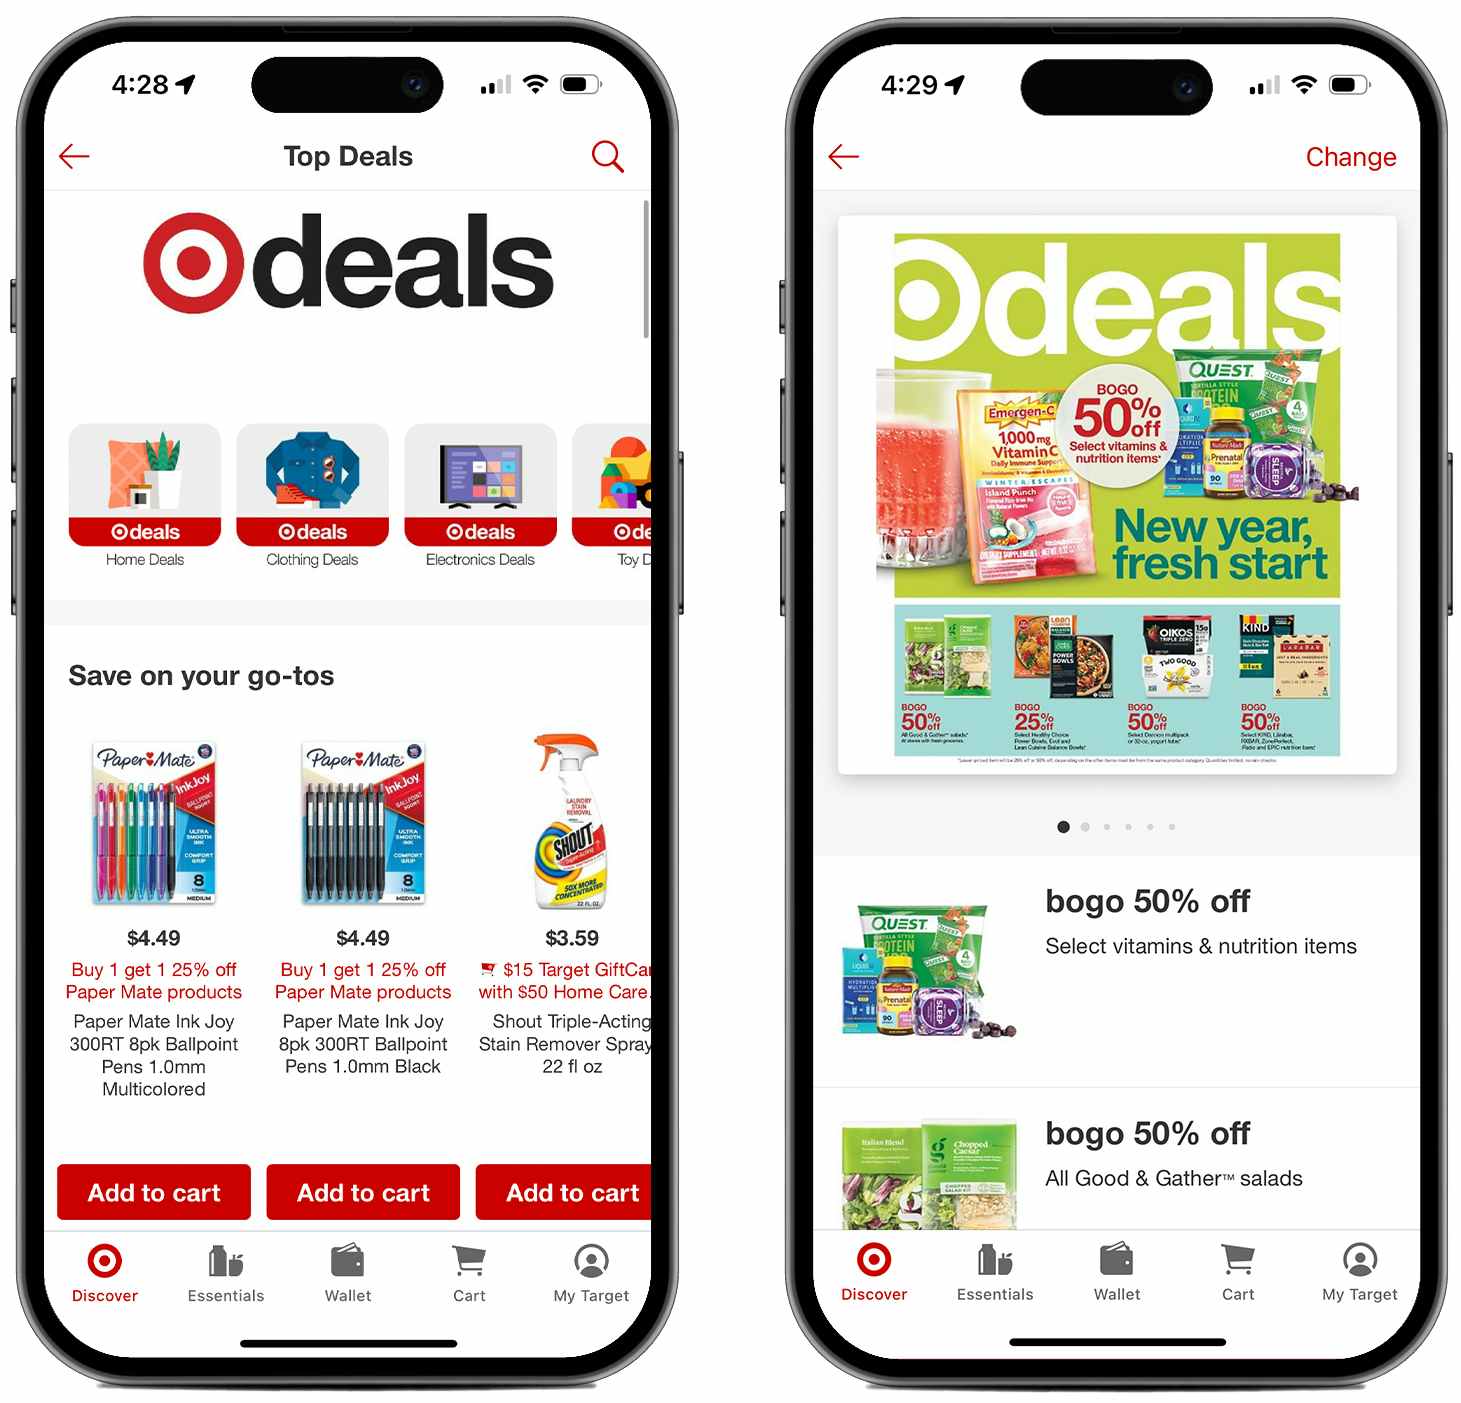 two smartphone screenshots of the target app: one showing the top deals page and the other showing a view of the weekly ad